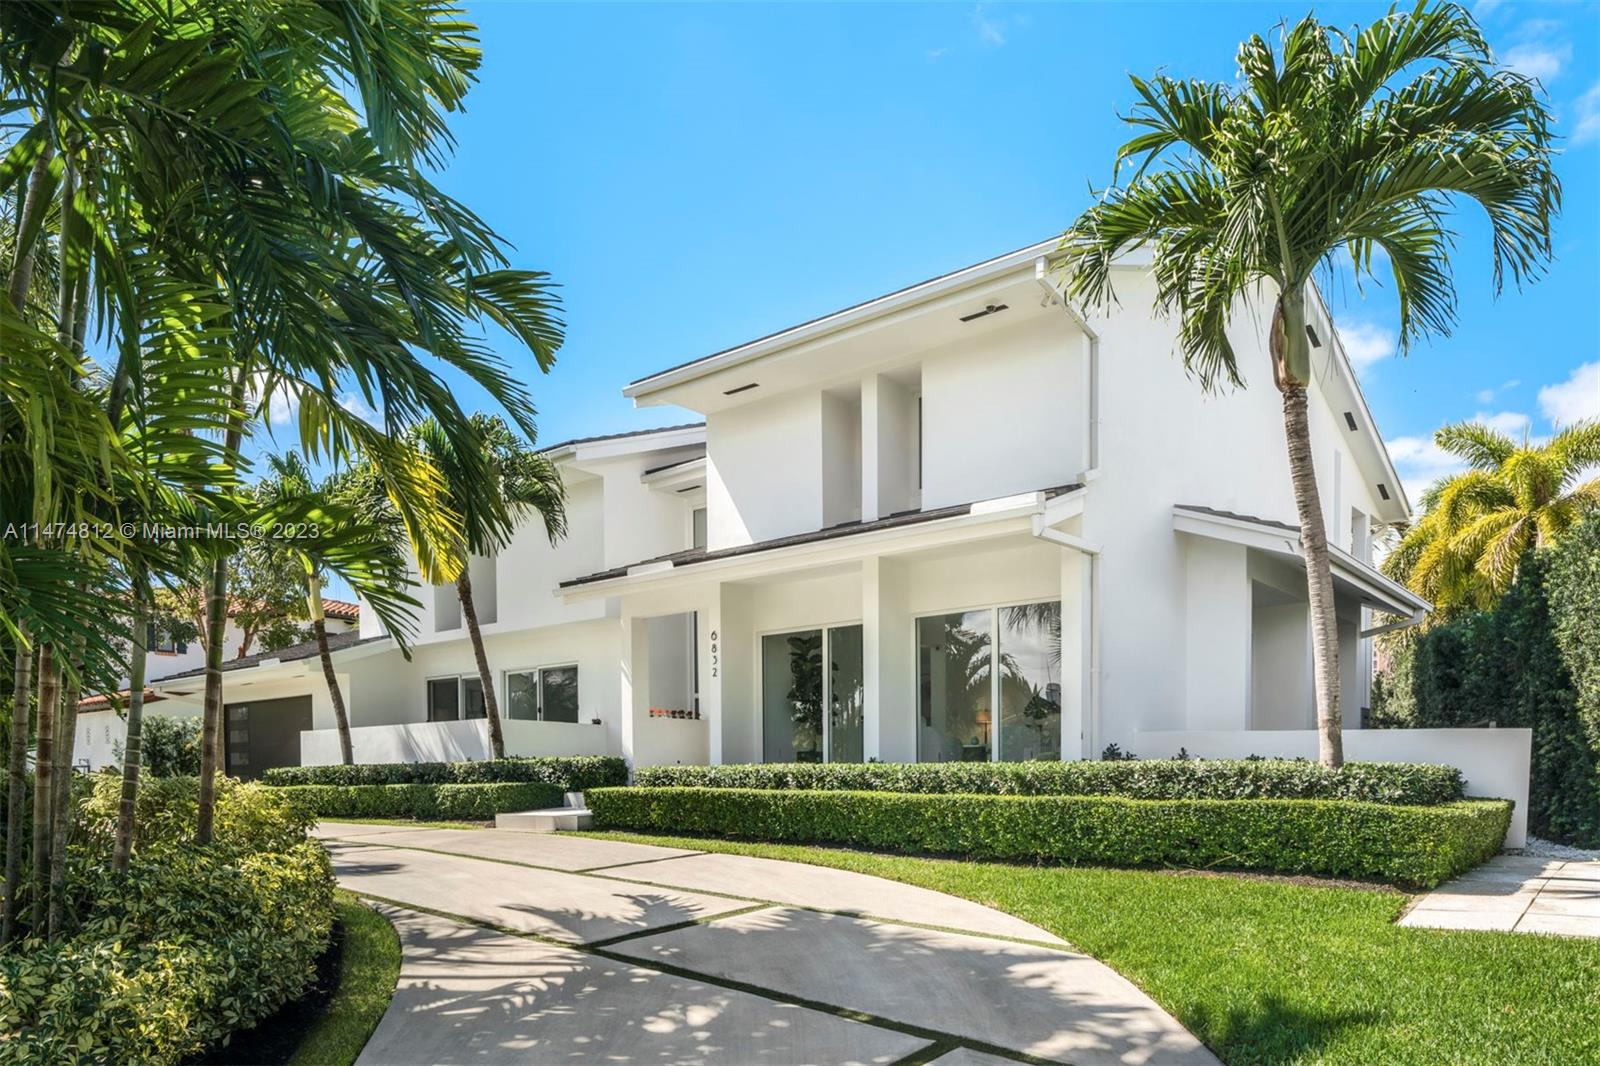 Fully remodeled 6,819 SF waterfront home in the highly sought-after Coral Gables gated community of Sunrise Harbour, with 5 bedrooms and 6 bathrooms. Beautifully oriented pavers & manicured landscaping provide stunning curb appeal leading to a grand entry with volume ceilings. The gourmet kitchen includes an oversized island, custom cabinetry, gas range, and top-of-the-line Thermador and Viking appliances. Tastefully remodeled, the residence offers a bright and spacious floor plan accompanied by high-end designer finishes. It also is a true boater’s paradise, with canal-facing pool, dock, and direct ocean access. Additional features include a climate-controlled wine cellar, new roof, impact windows and doors, smart home system, and electric Lutron blinds. Property is also listed for rent.